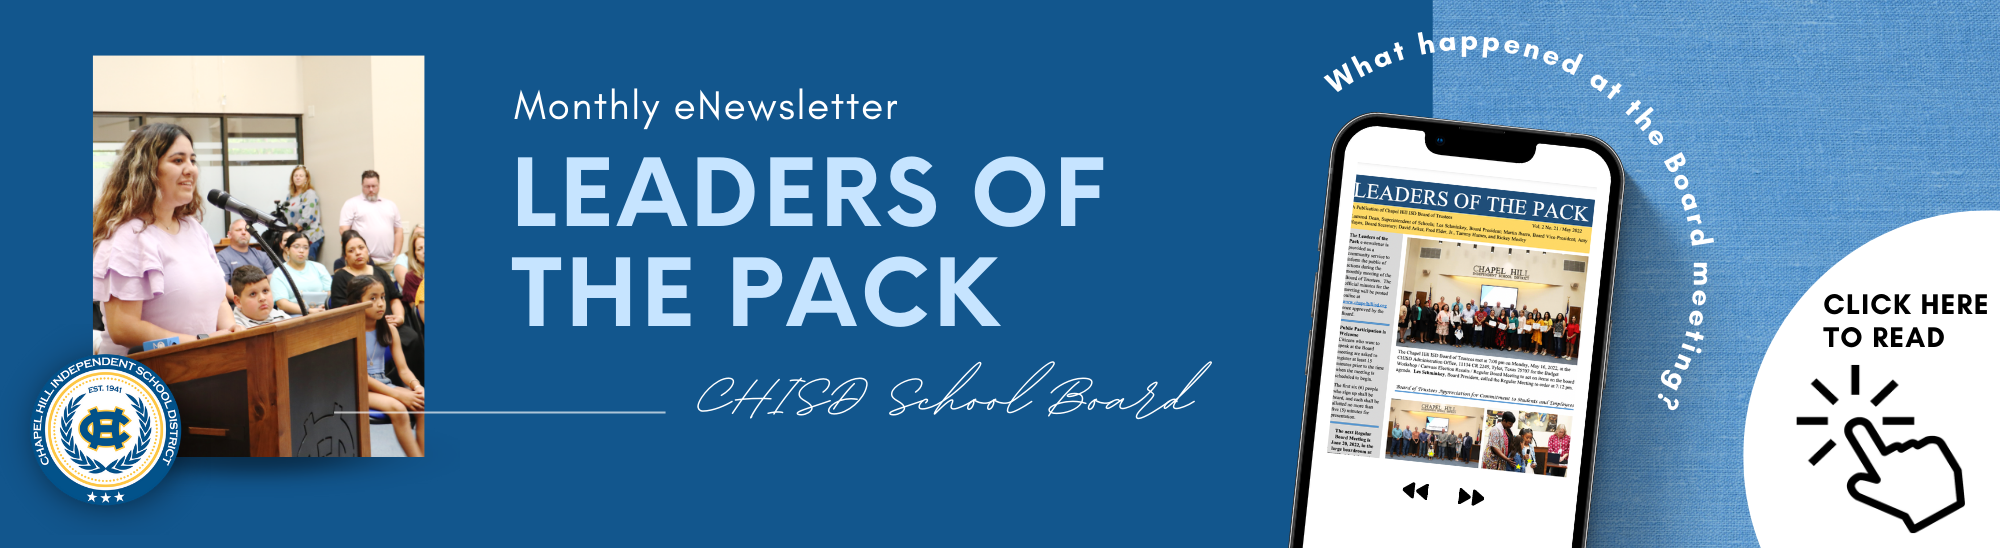 Leaders of the Pack Newsletter